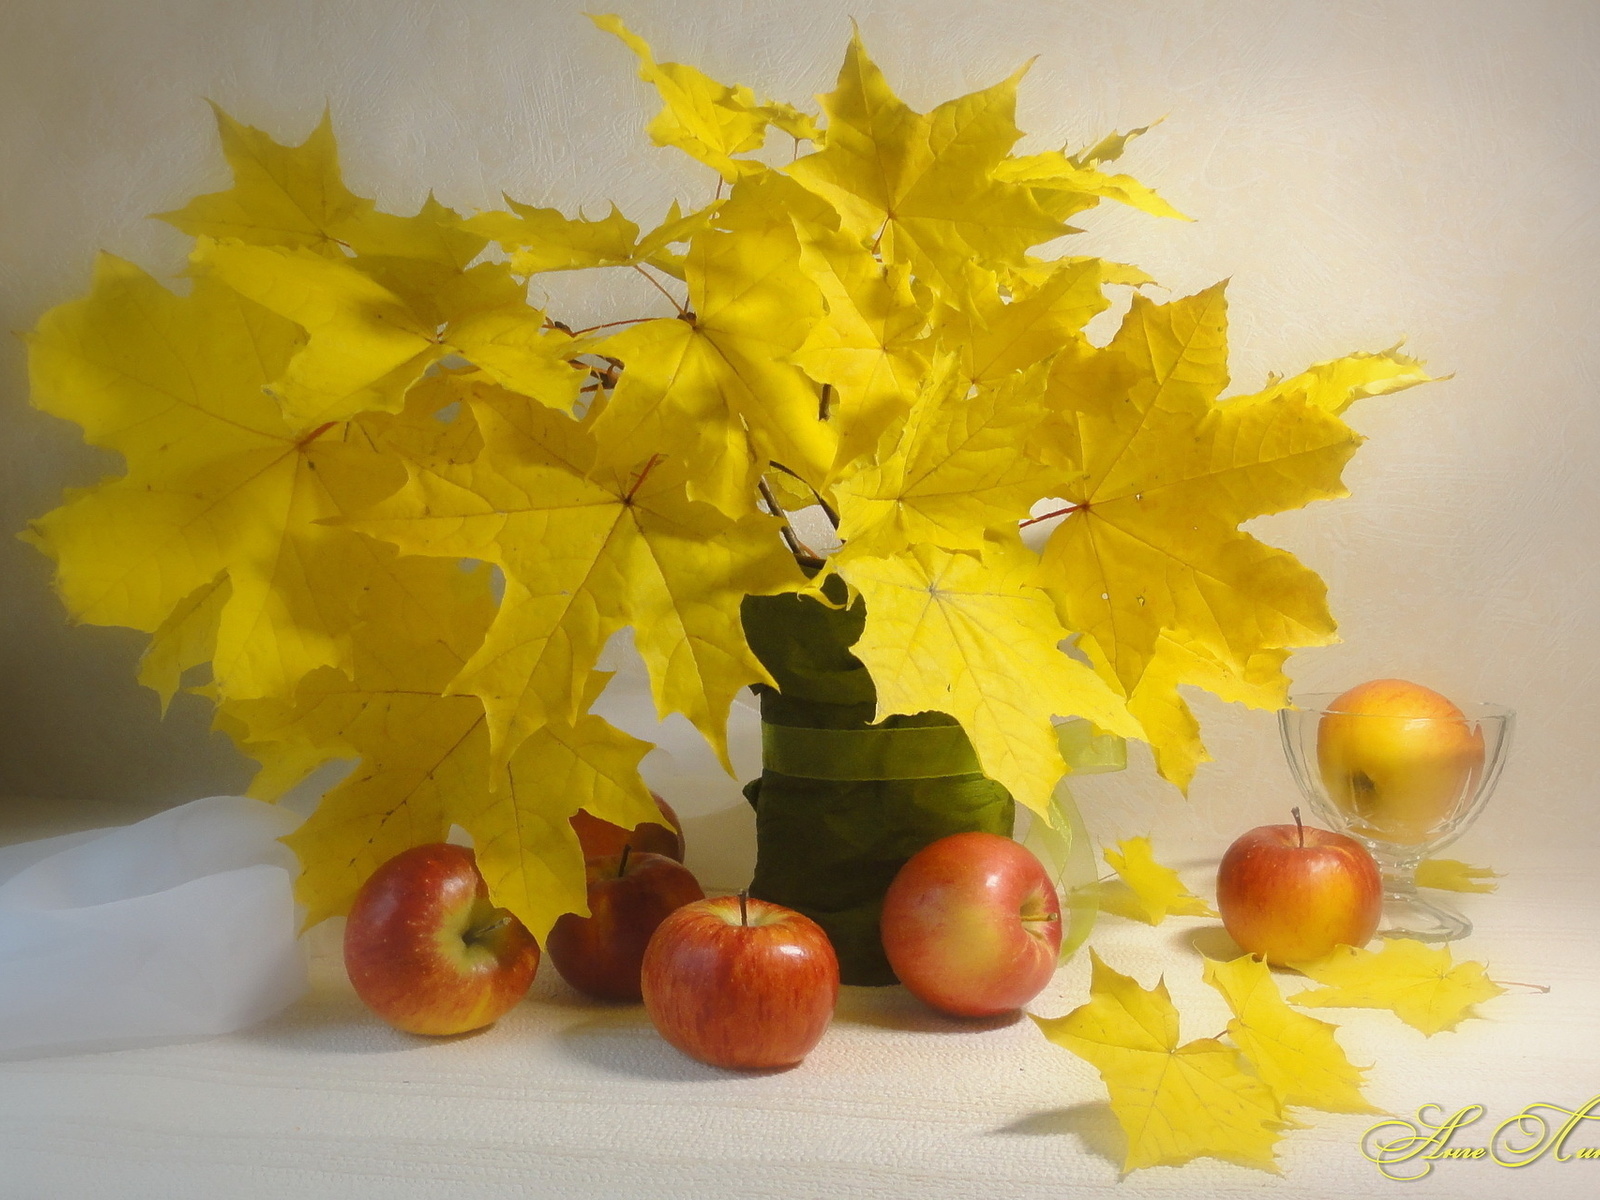 plants, food, leaves, apples, bouquets, still life, yellow